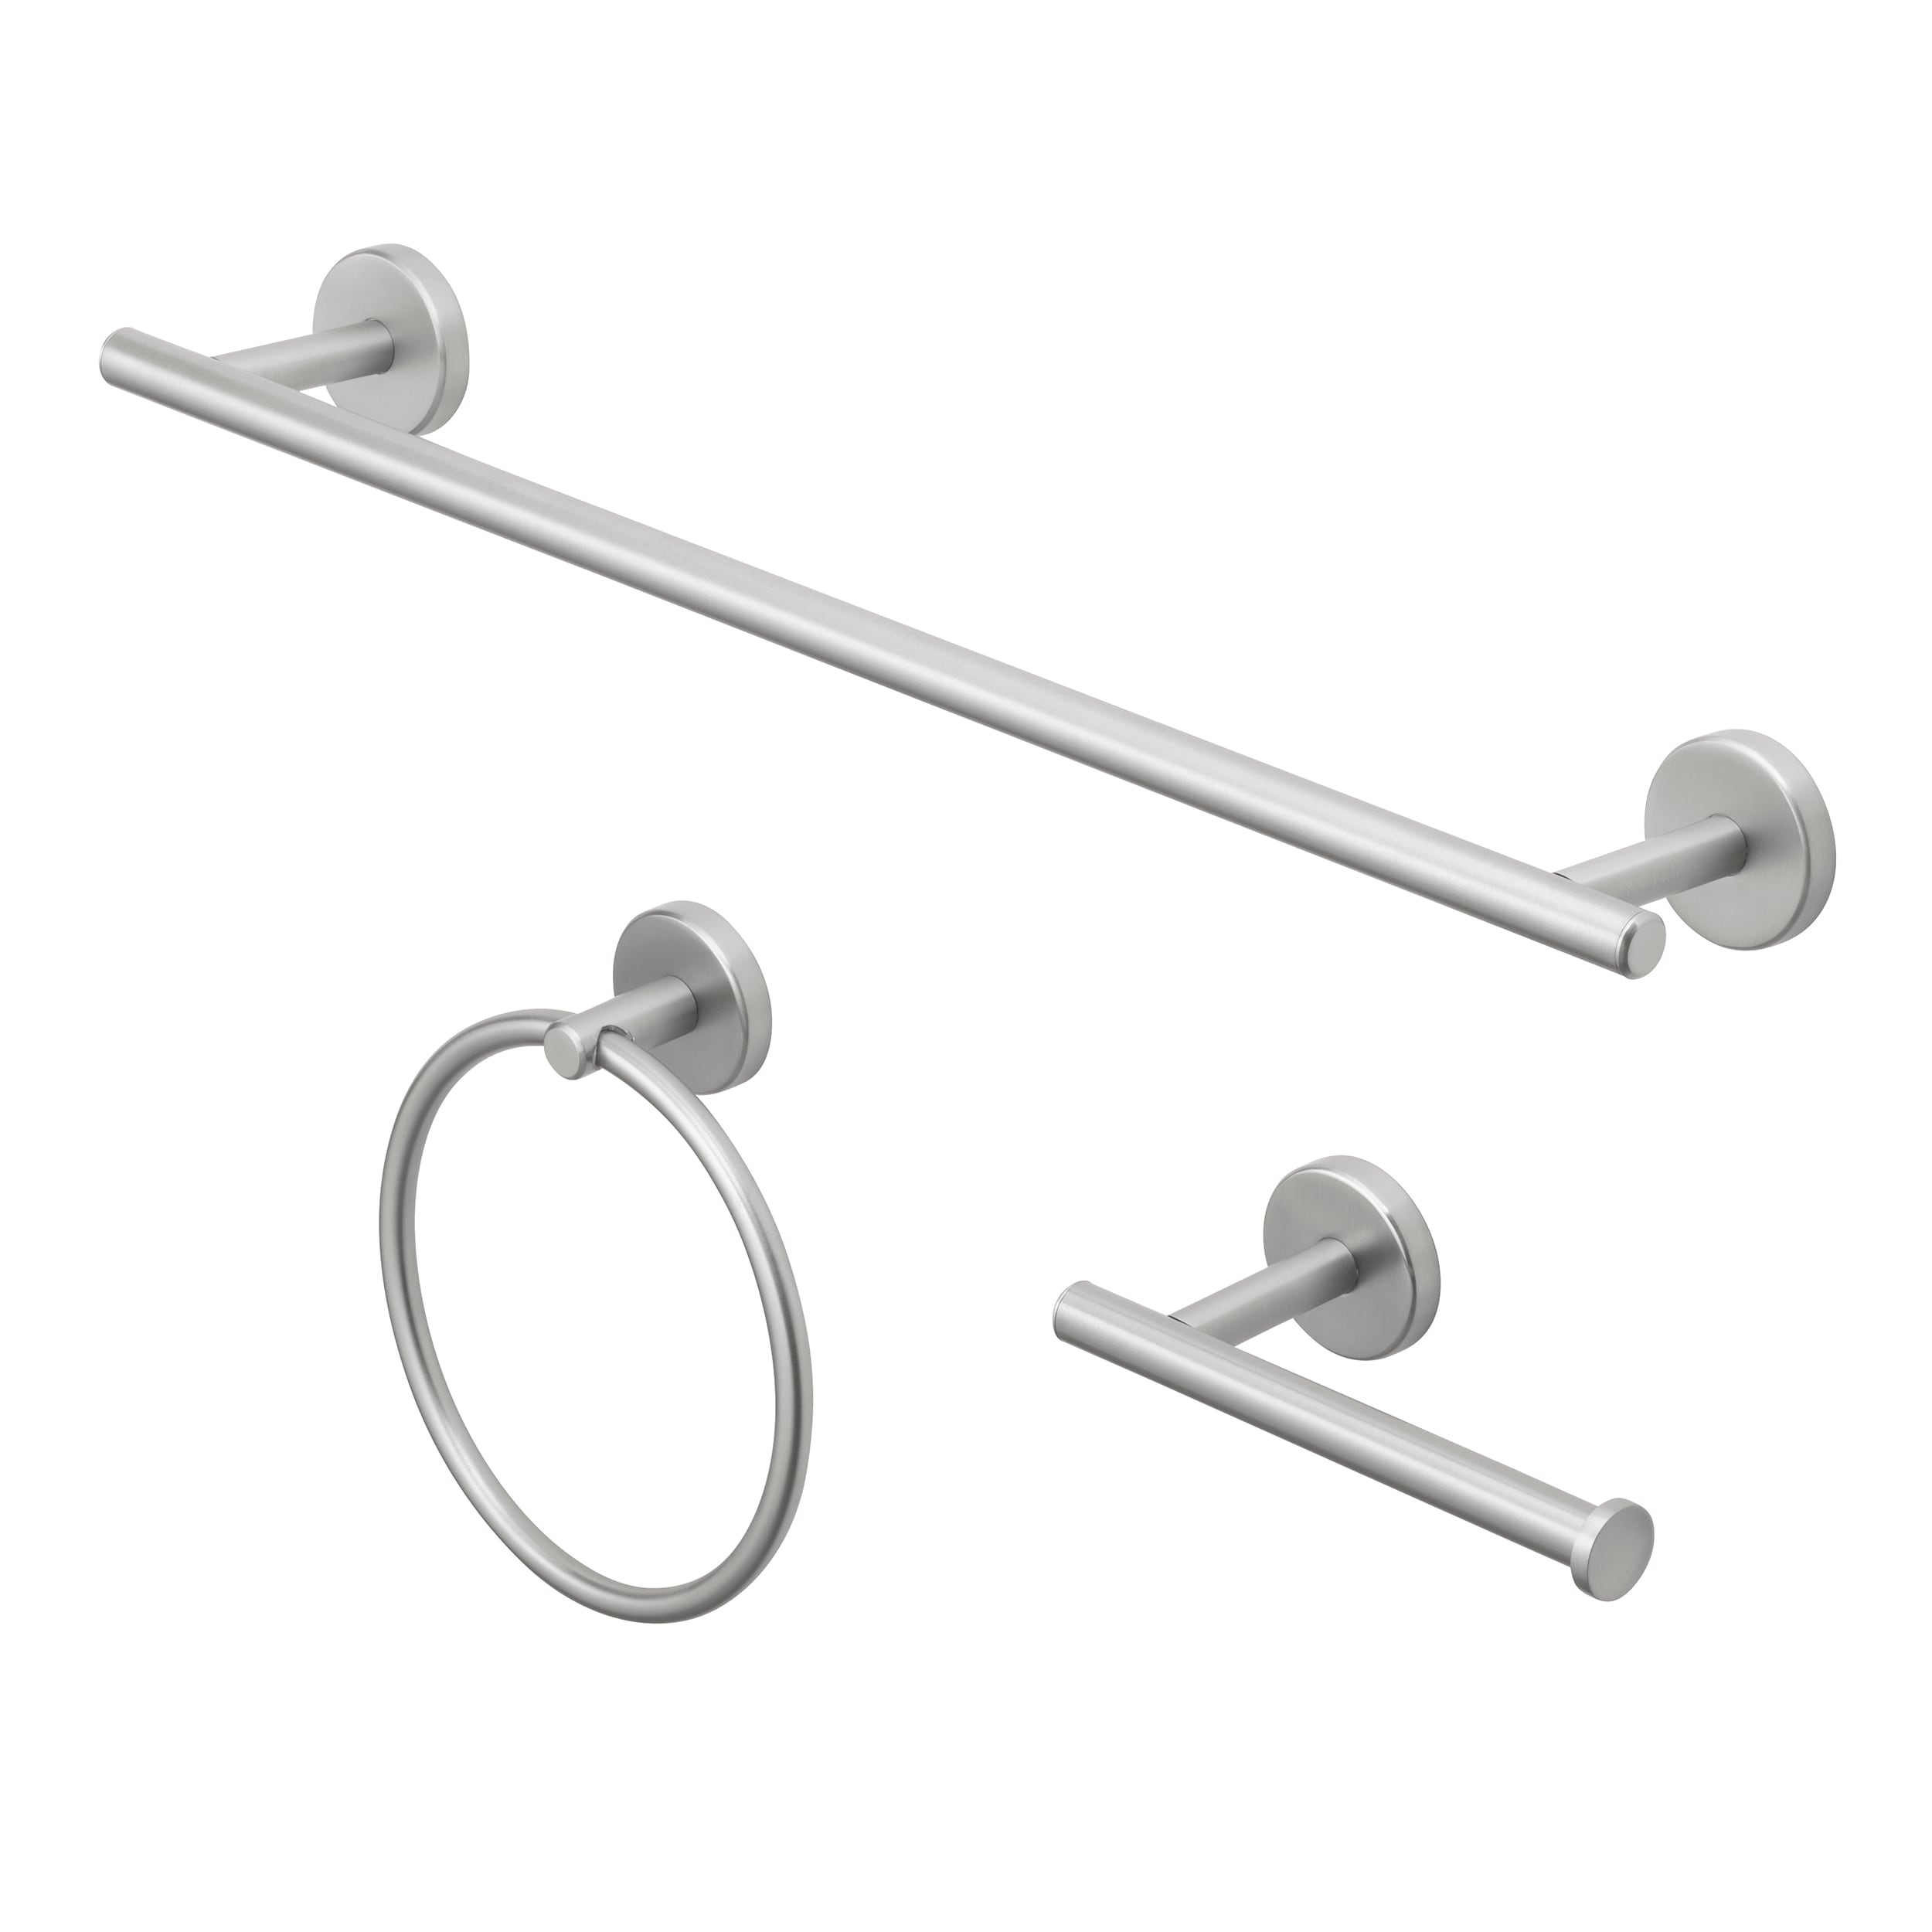 3pcs Stainless Steel Double S-Shaped Hooks For Kitchen, Bathroom